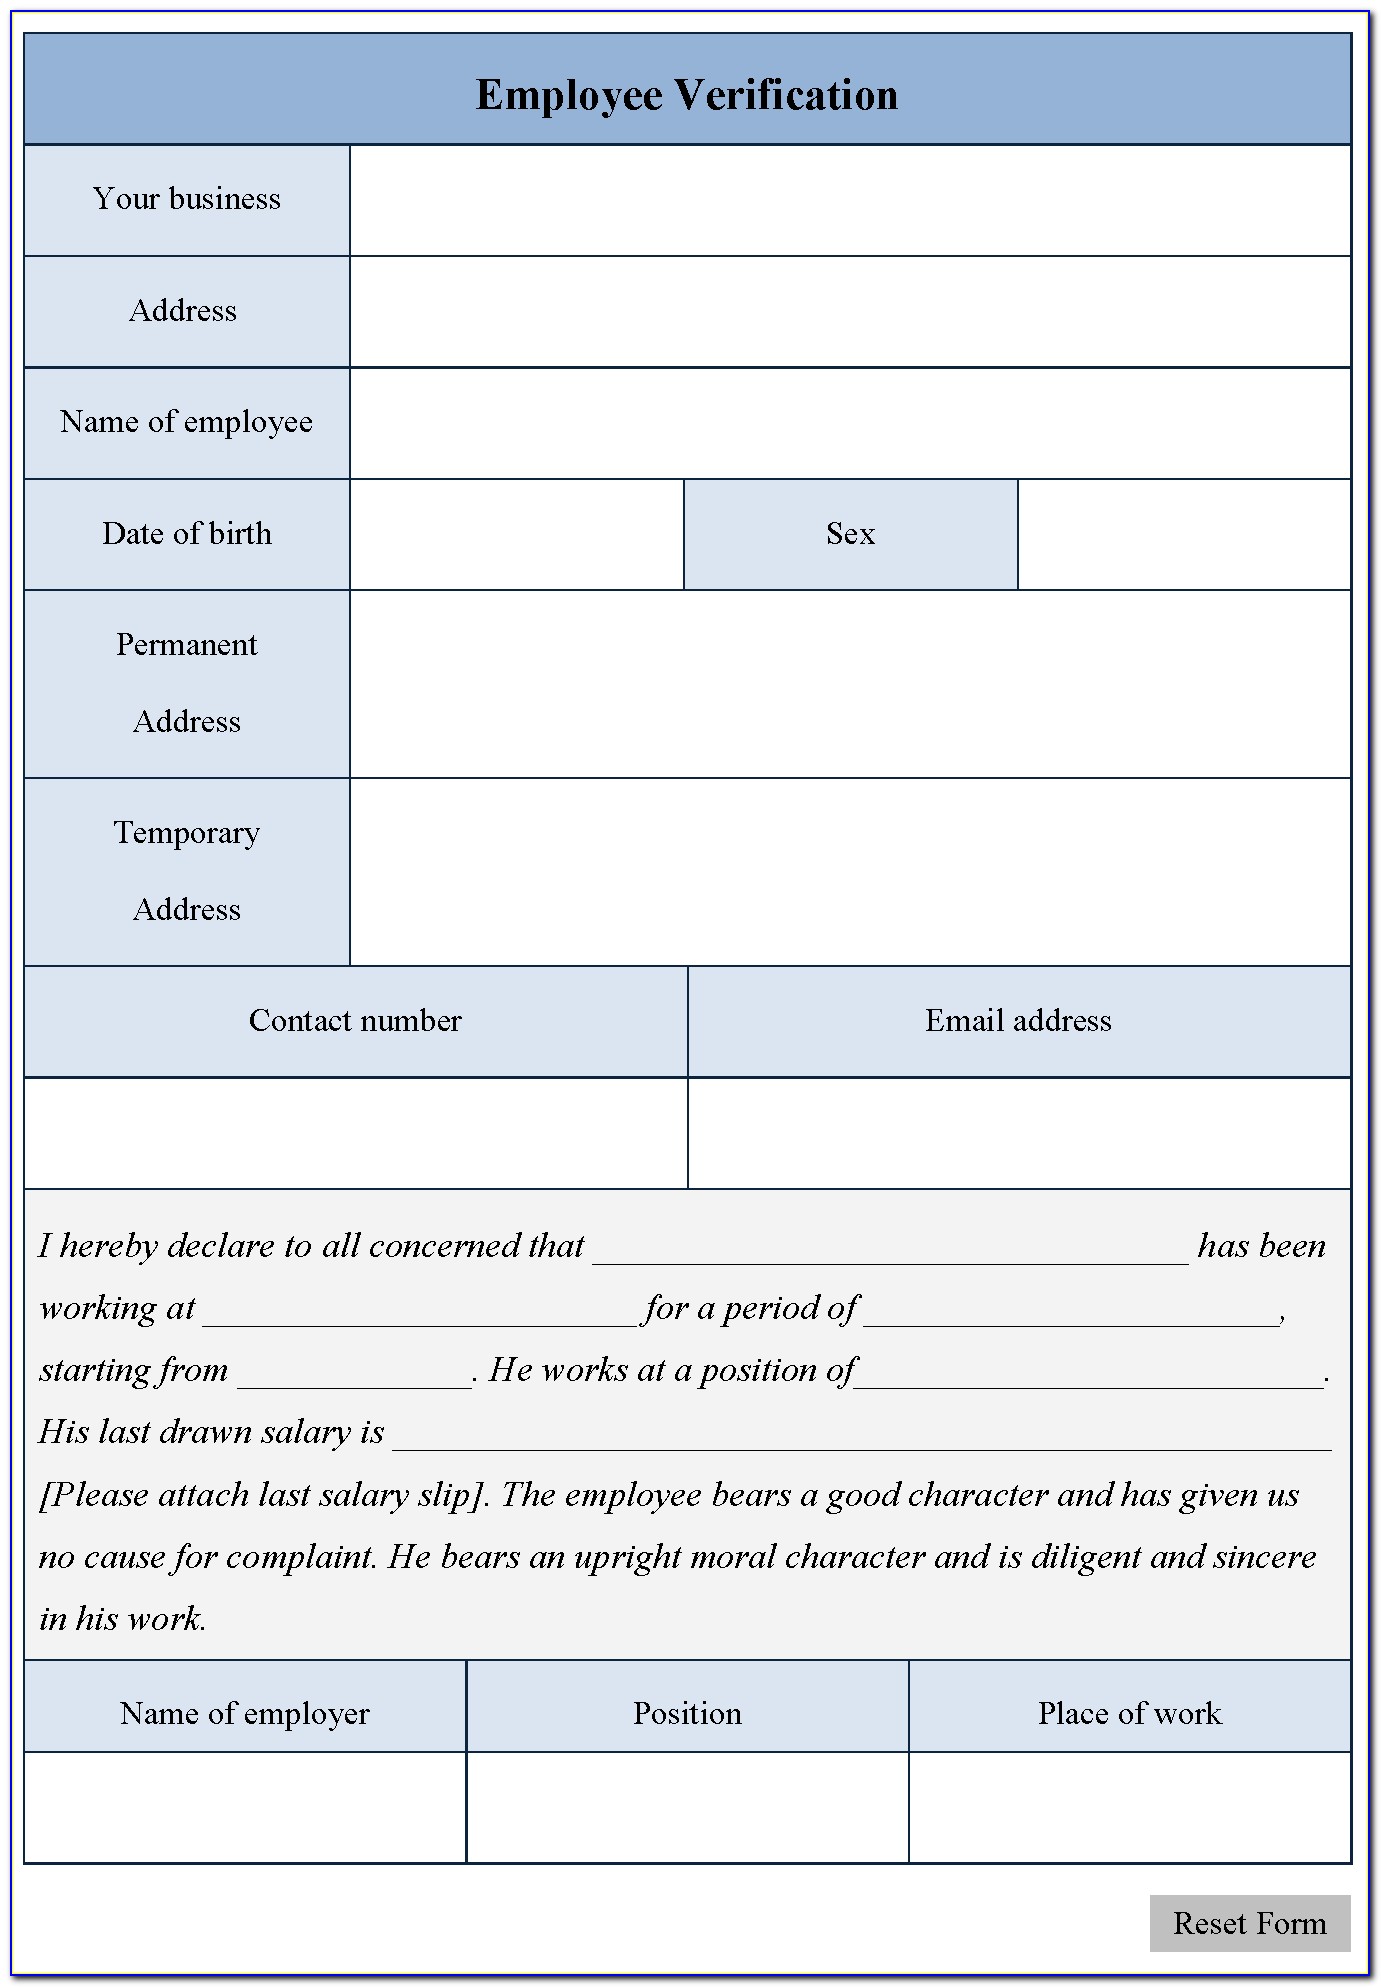 Creating Forms In Excel Pdf